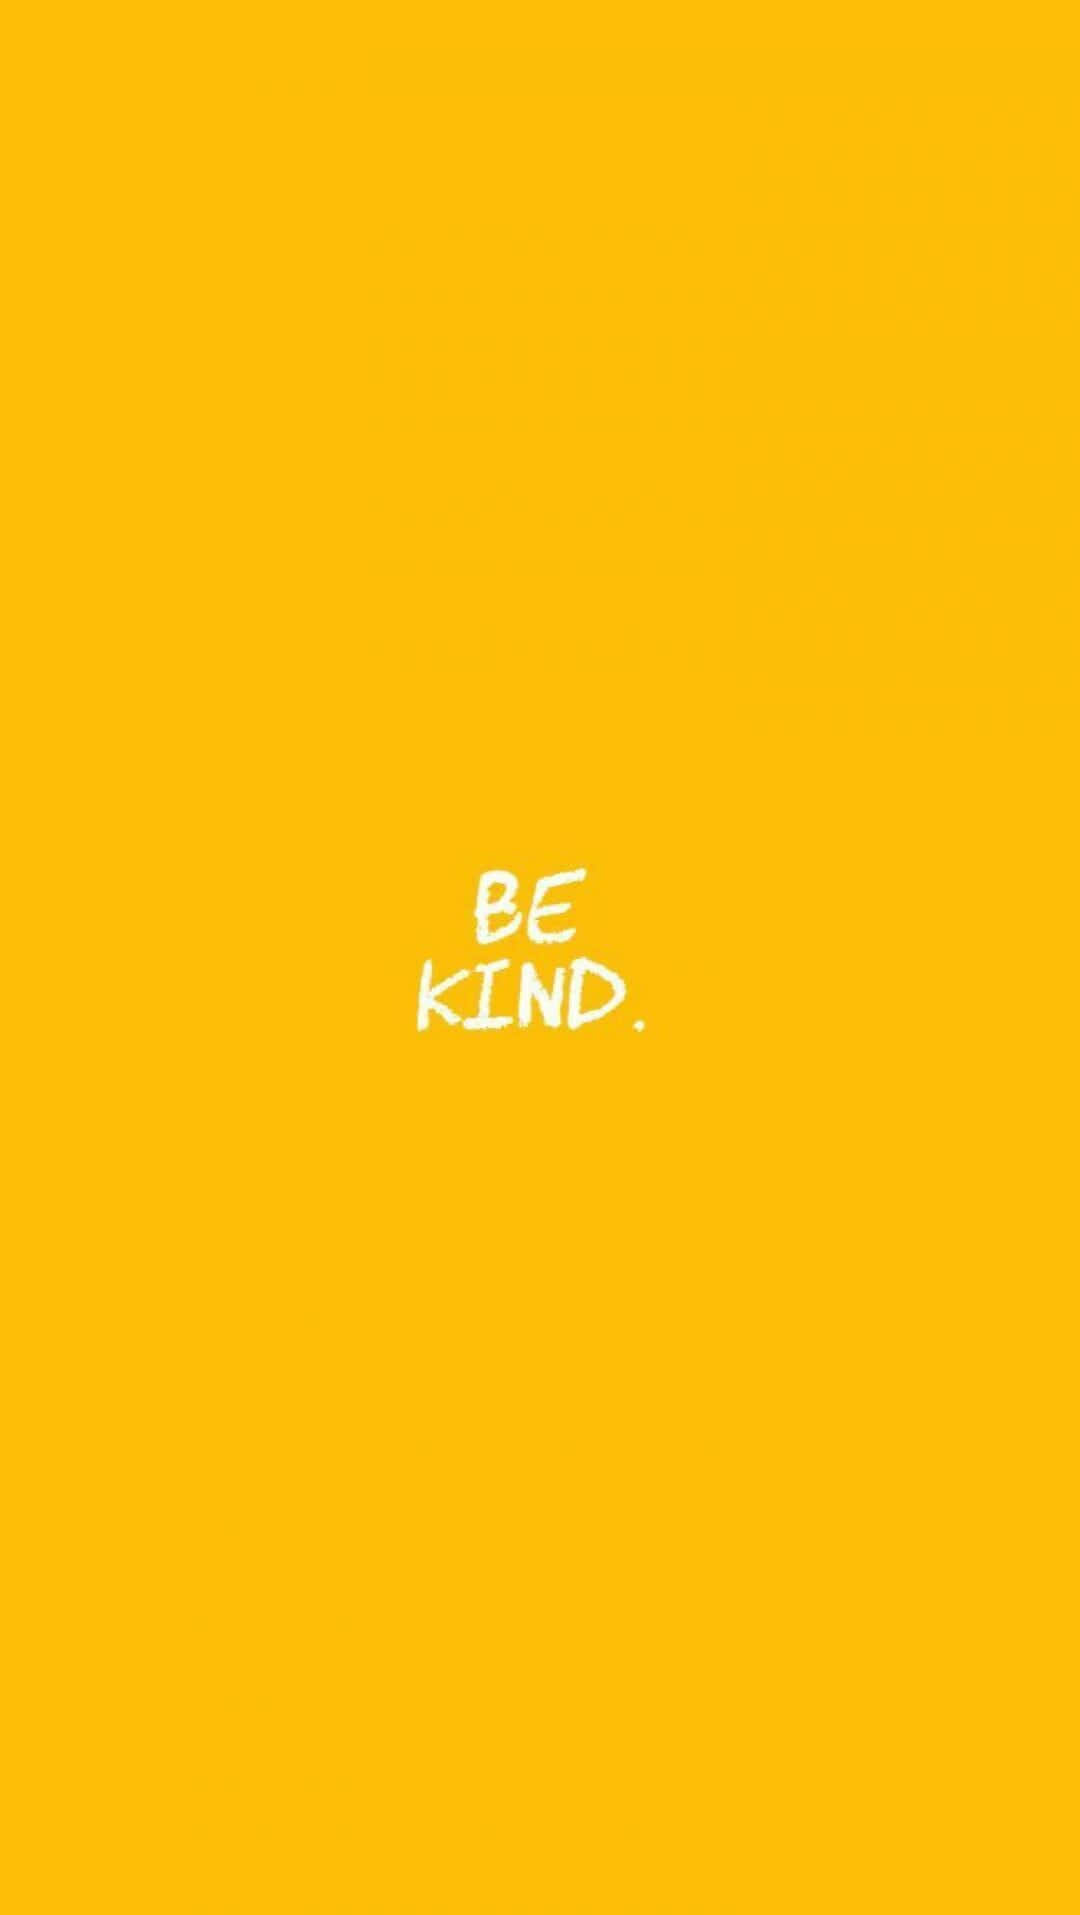 Be Kind Yellow Phone Wallpaper